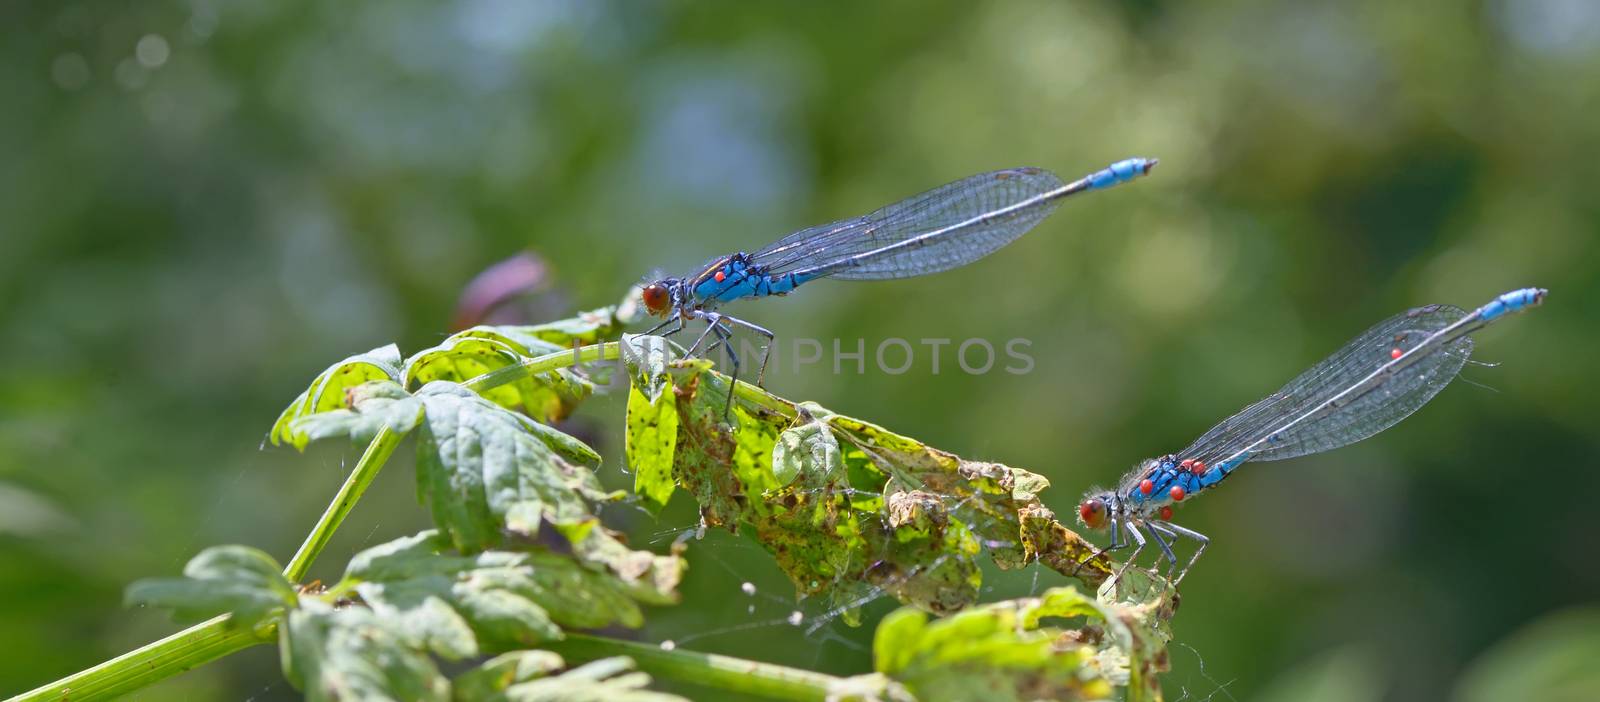 Blue Coenagrionidae in forest by mady70